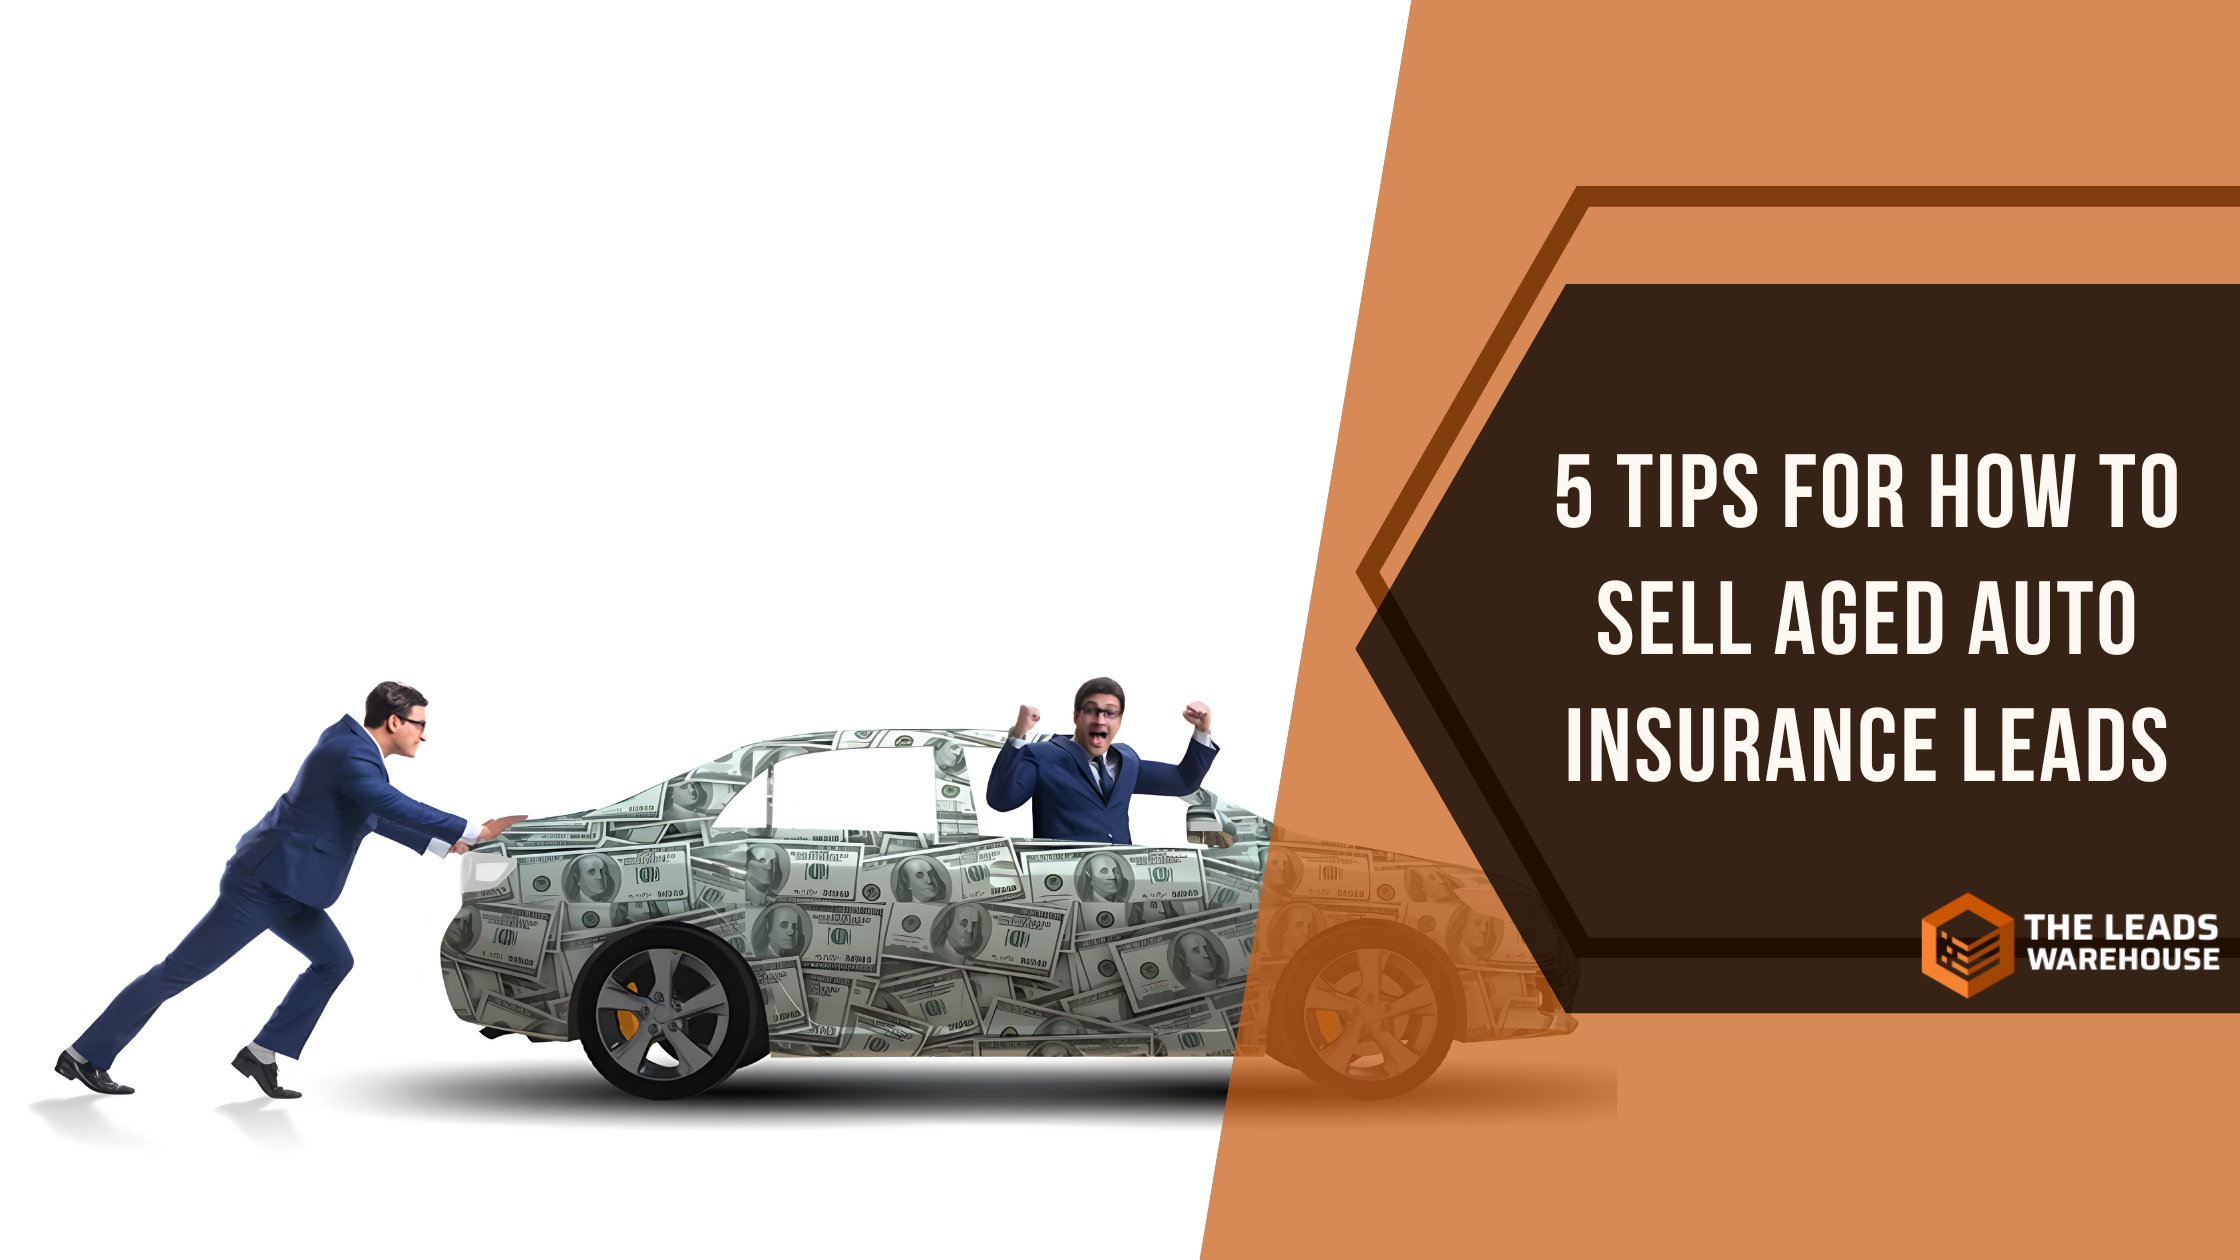 Sell Auto Insurance Leads | 5 Tips